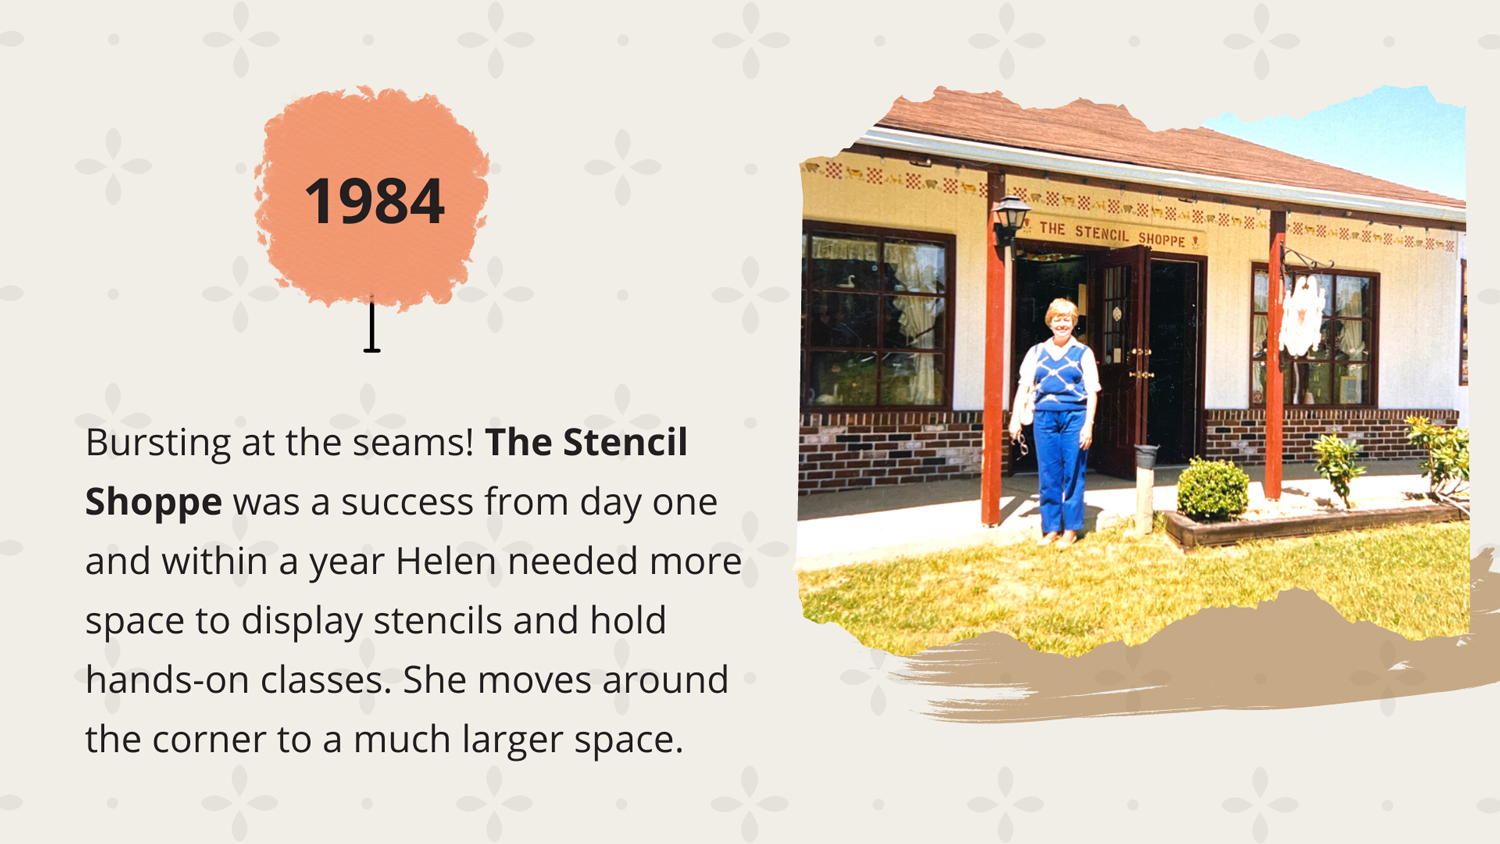 1984 - Bursting at the seams! The Stencil Shoppe was a success from day one and so within a year Helen needed more space to display stencils and hold hands-on classes. She moves around the corner to a much larger space. 